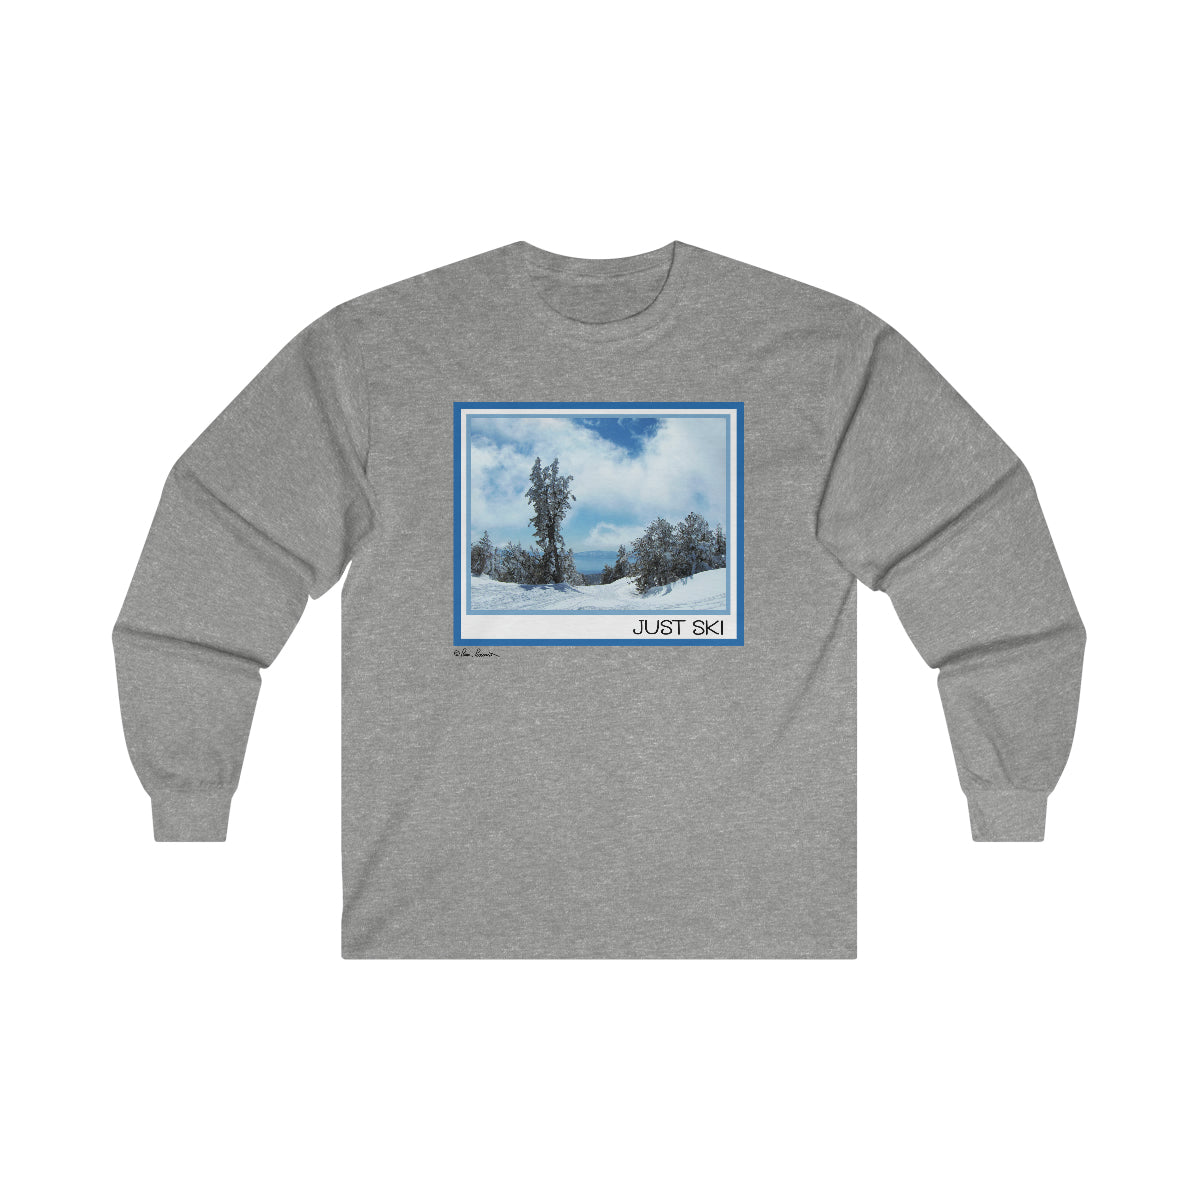 Flat front view of the Sport Grey T-shirt